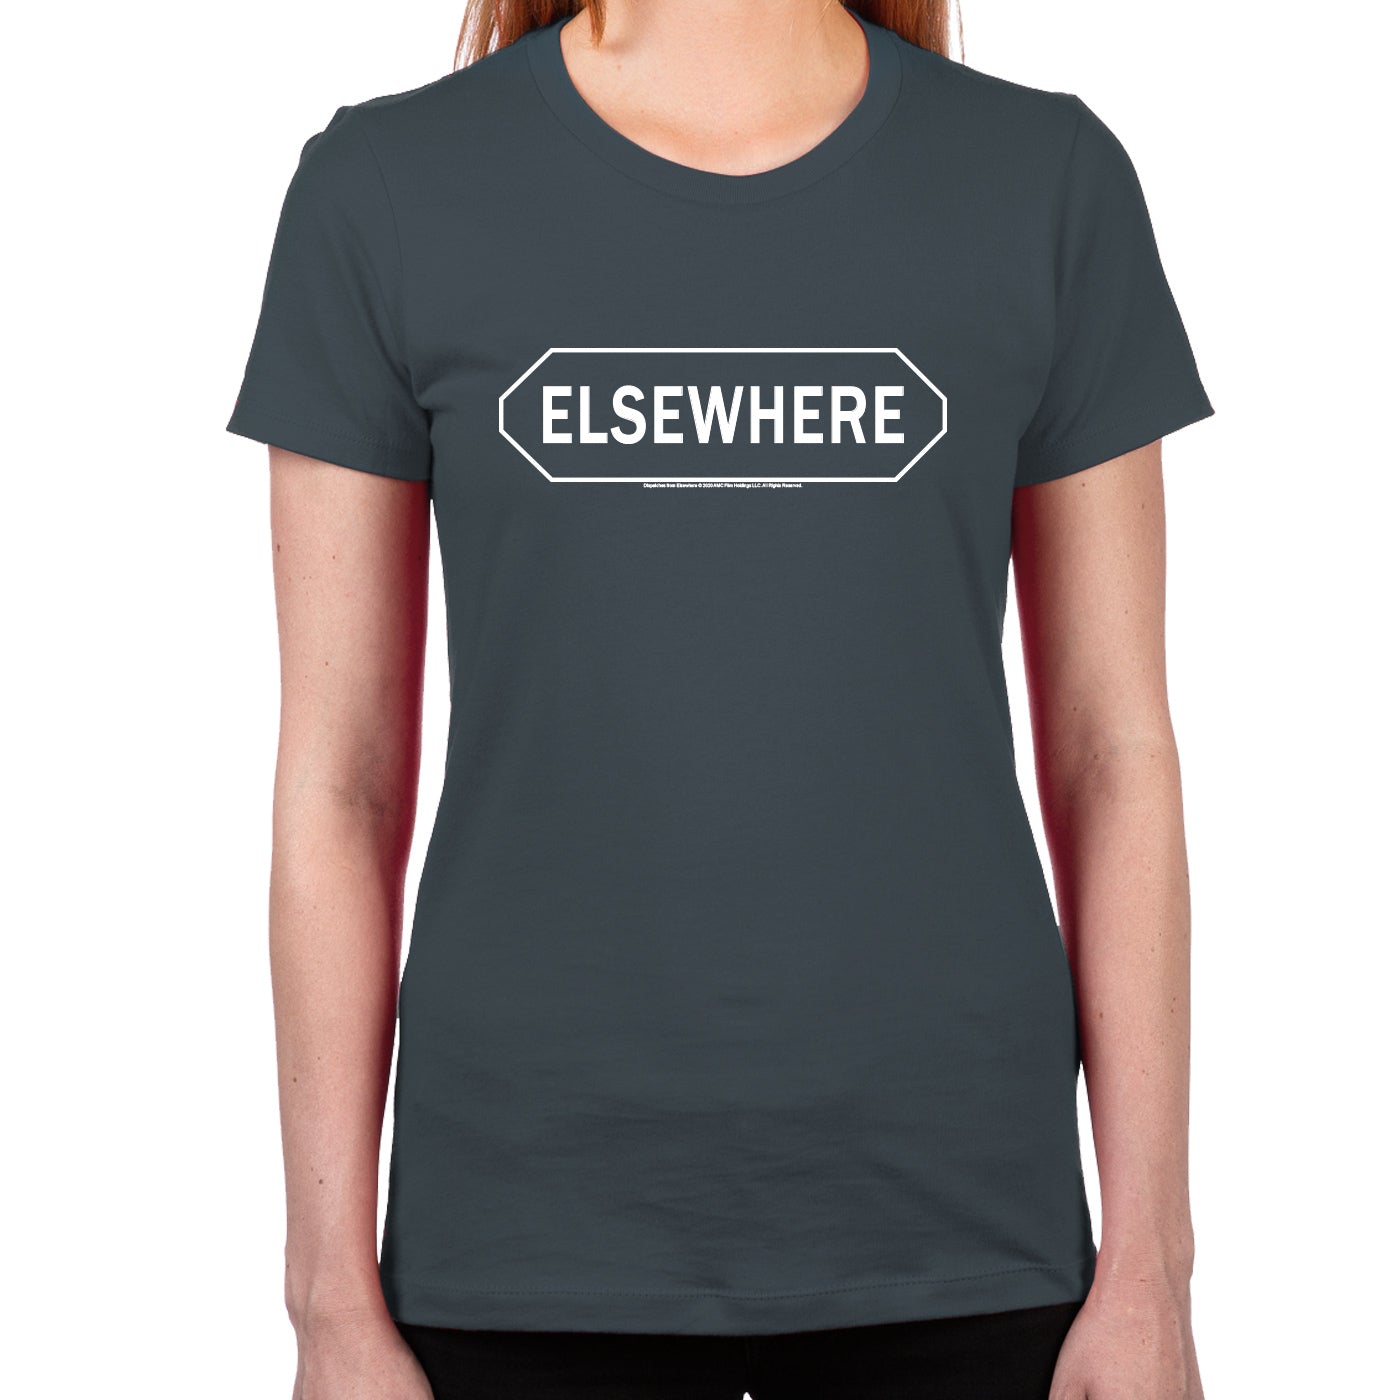 Dispatches From Elsewhere Elsewhere Women's T-Shirt